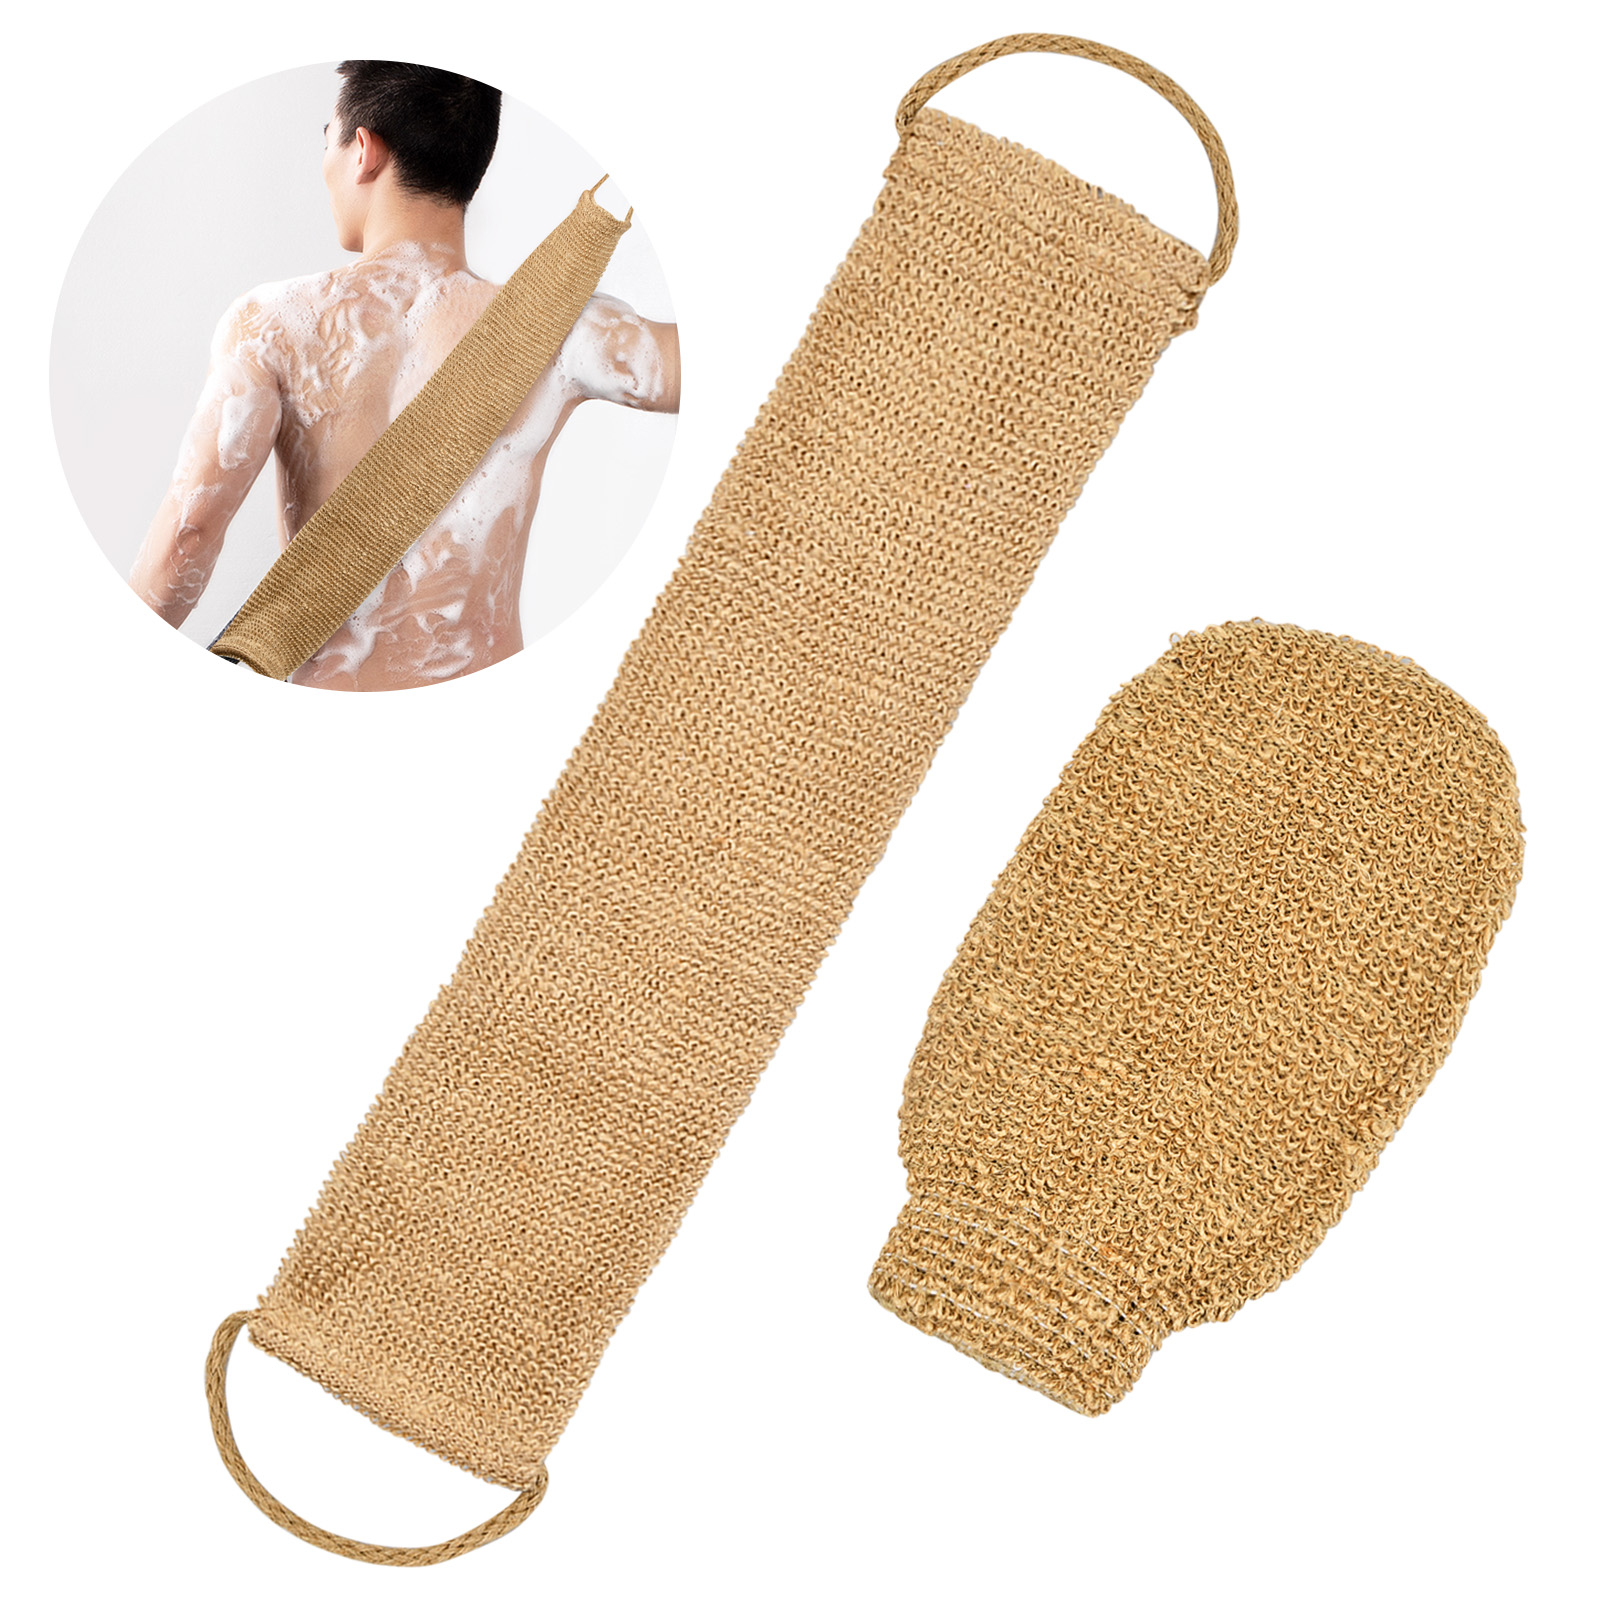 

1 Set Back Scrubber Exfoliator, Natural Hemp Exfoliating Glove And Strap, Body Cleaning Gloves For Men Women, Dead Skin Removal Scrub Gloves, Bath Scrubber For Cleaning Body